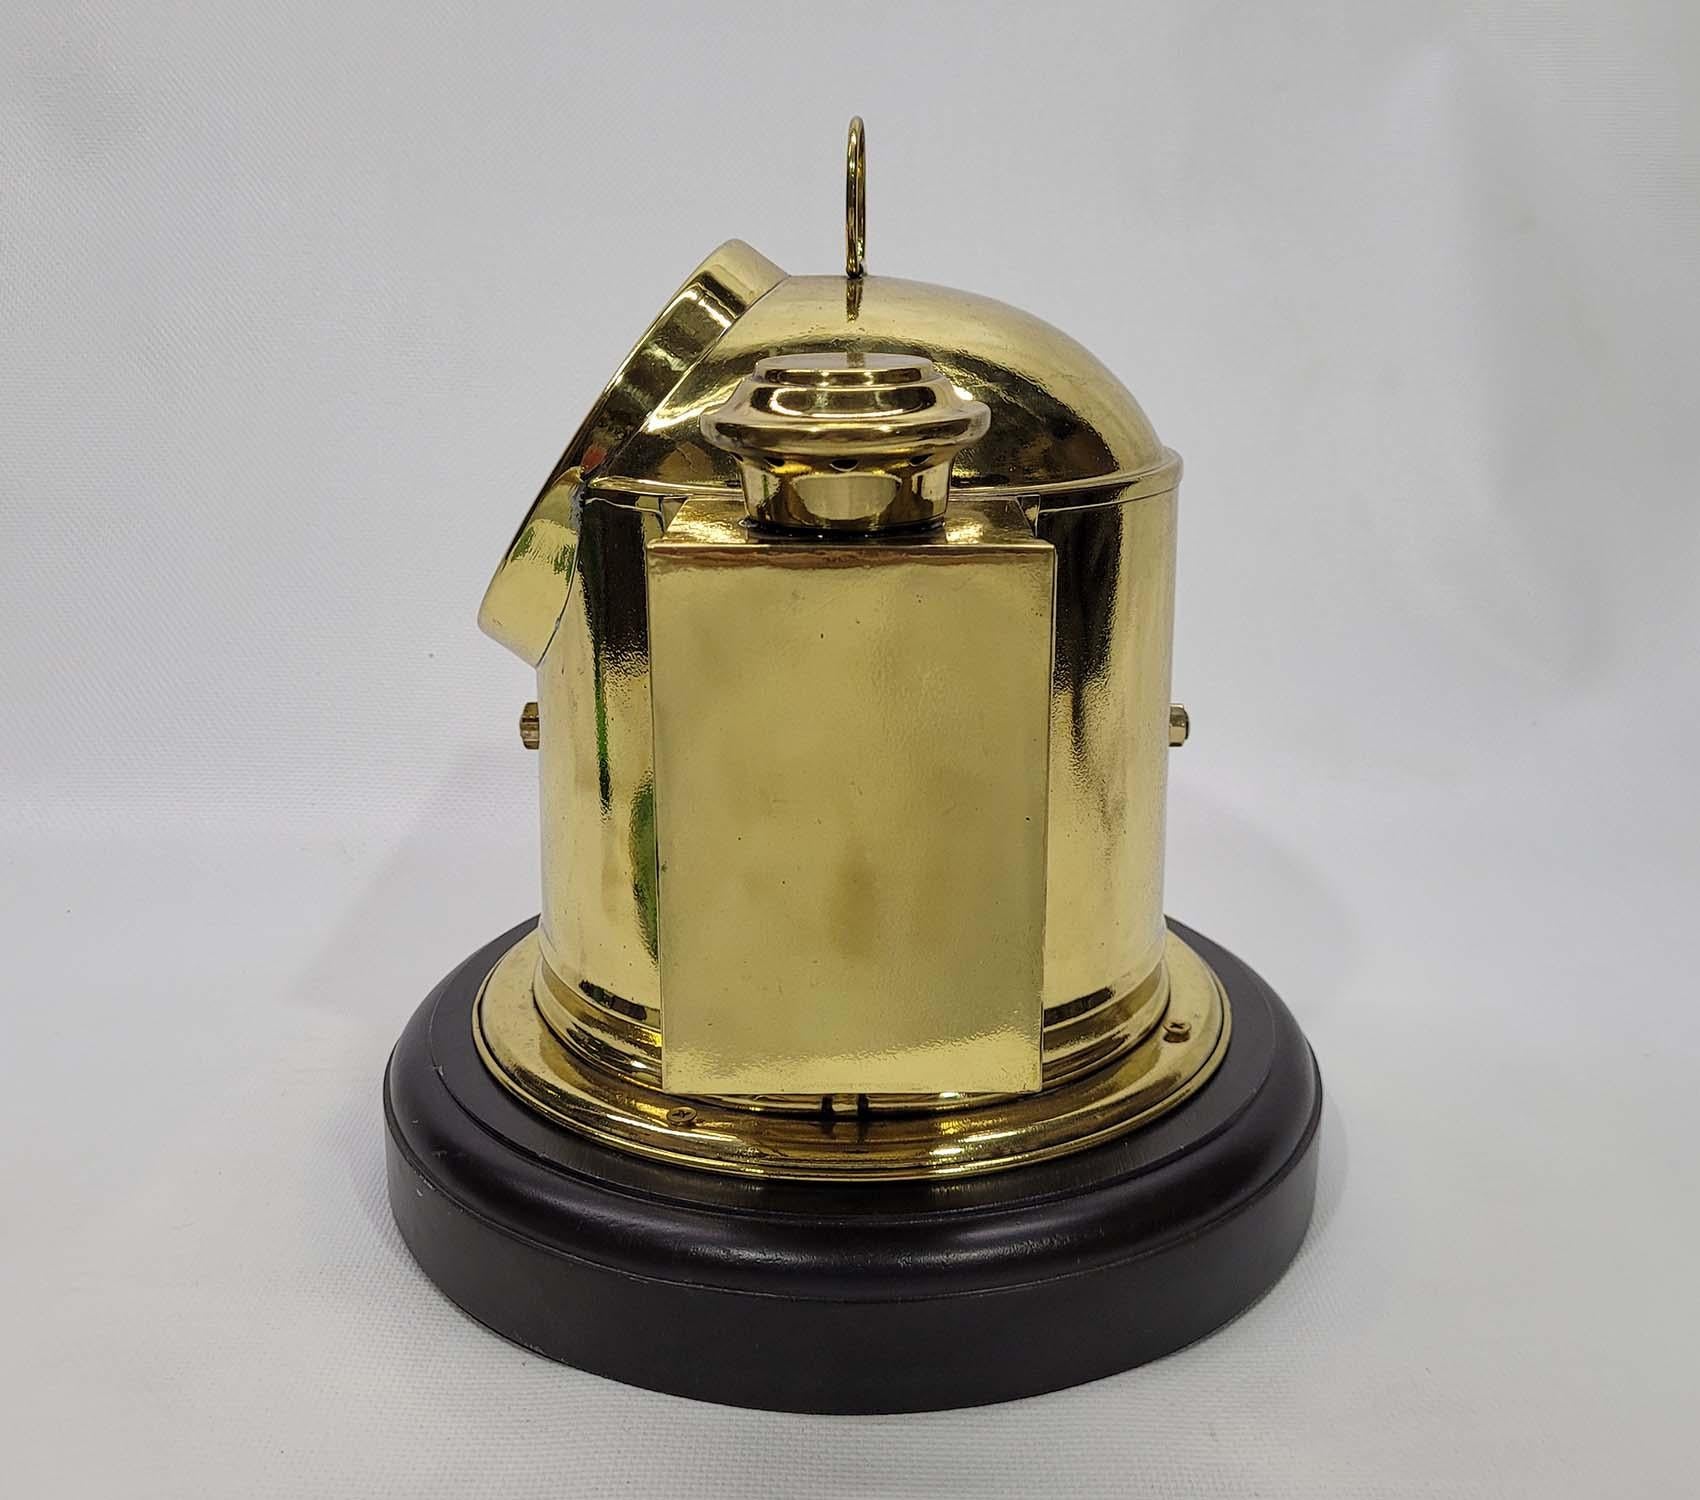 Polished Solid Brass Boat Compass Binnacle